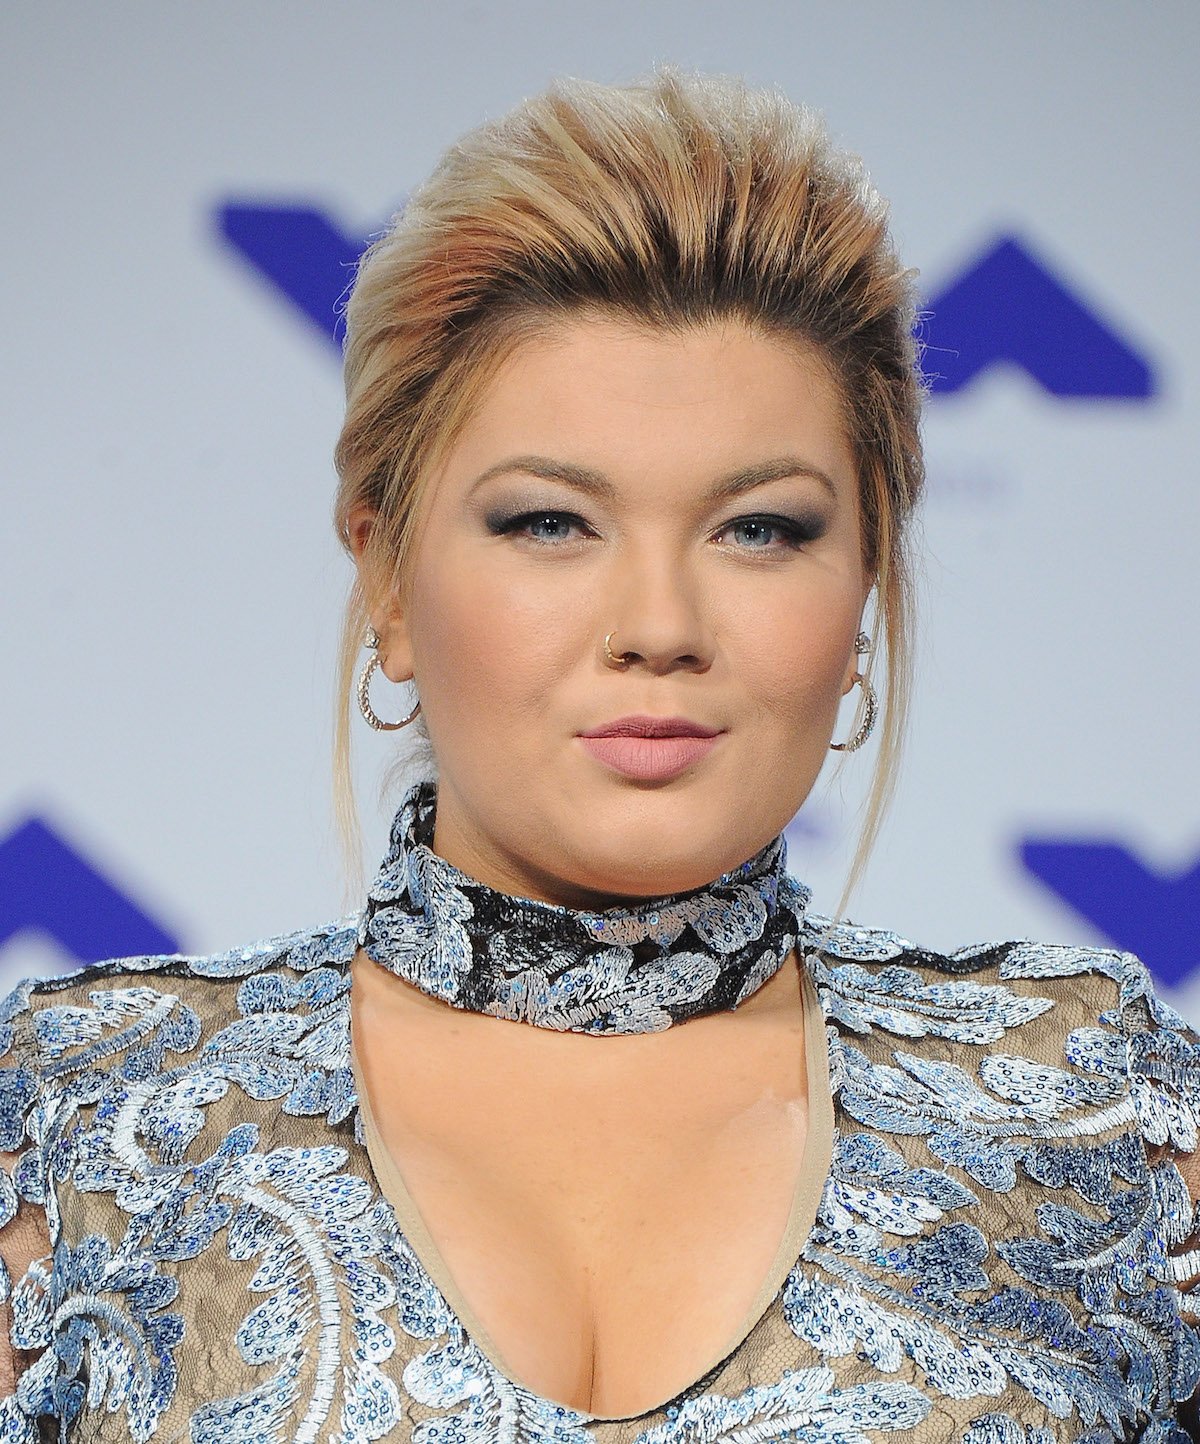 Teen Mom OG star Amber Portwood walks the red carpet in a sparkly gown for the 2017 MTV VMas